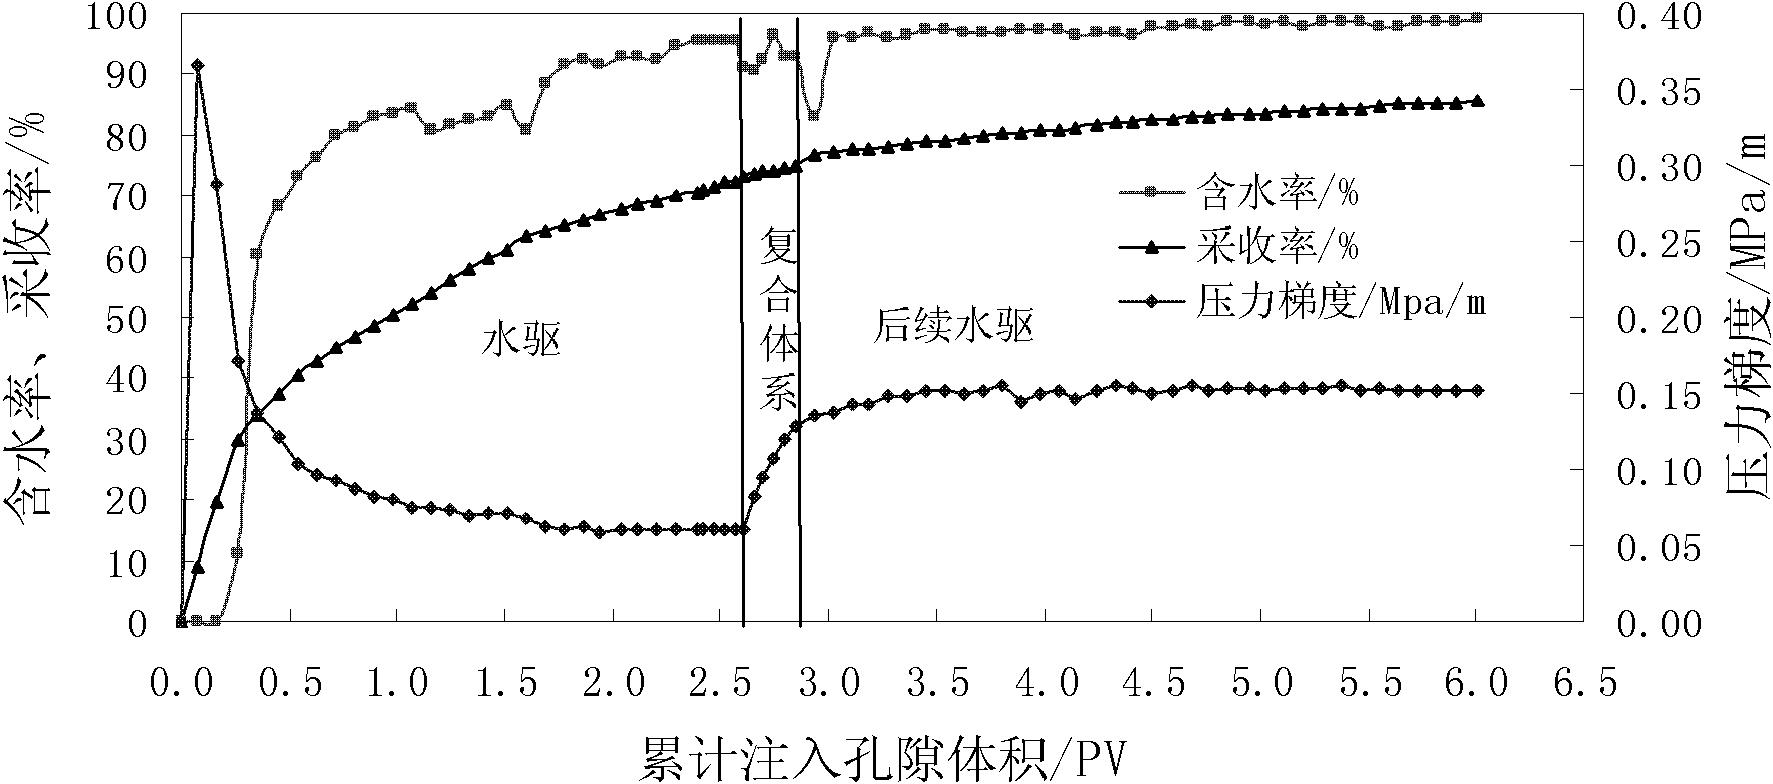 Composite profile control and oil displacement extraction method for thickened oil reservoir through water injection and exploitation